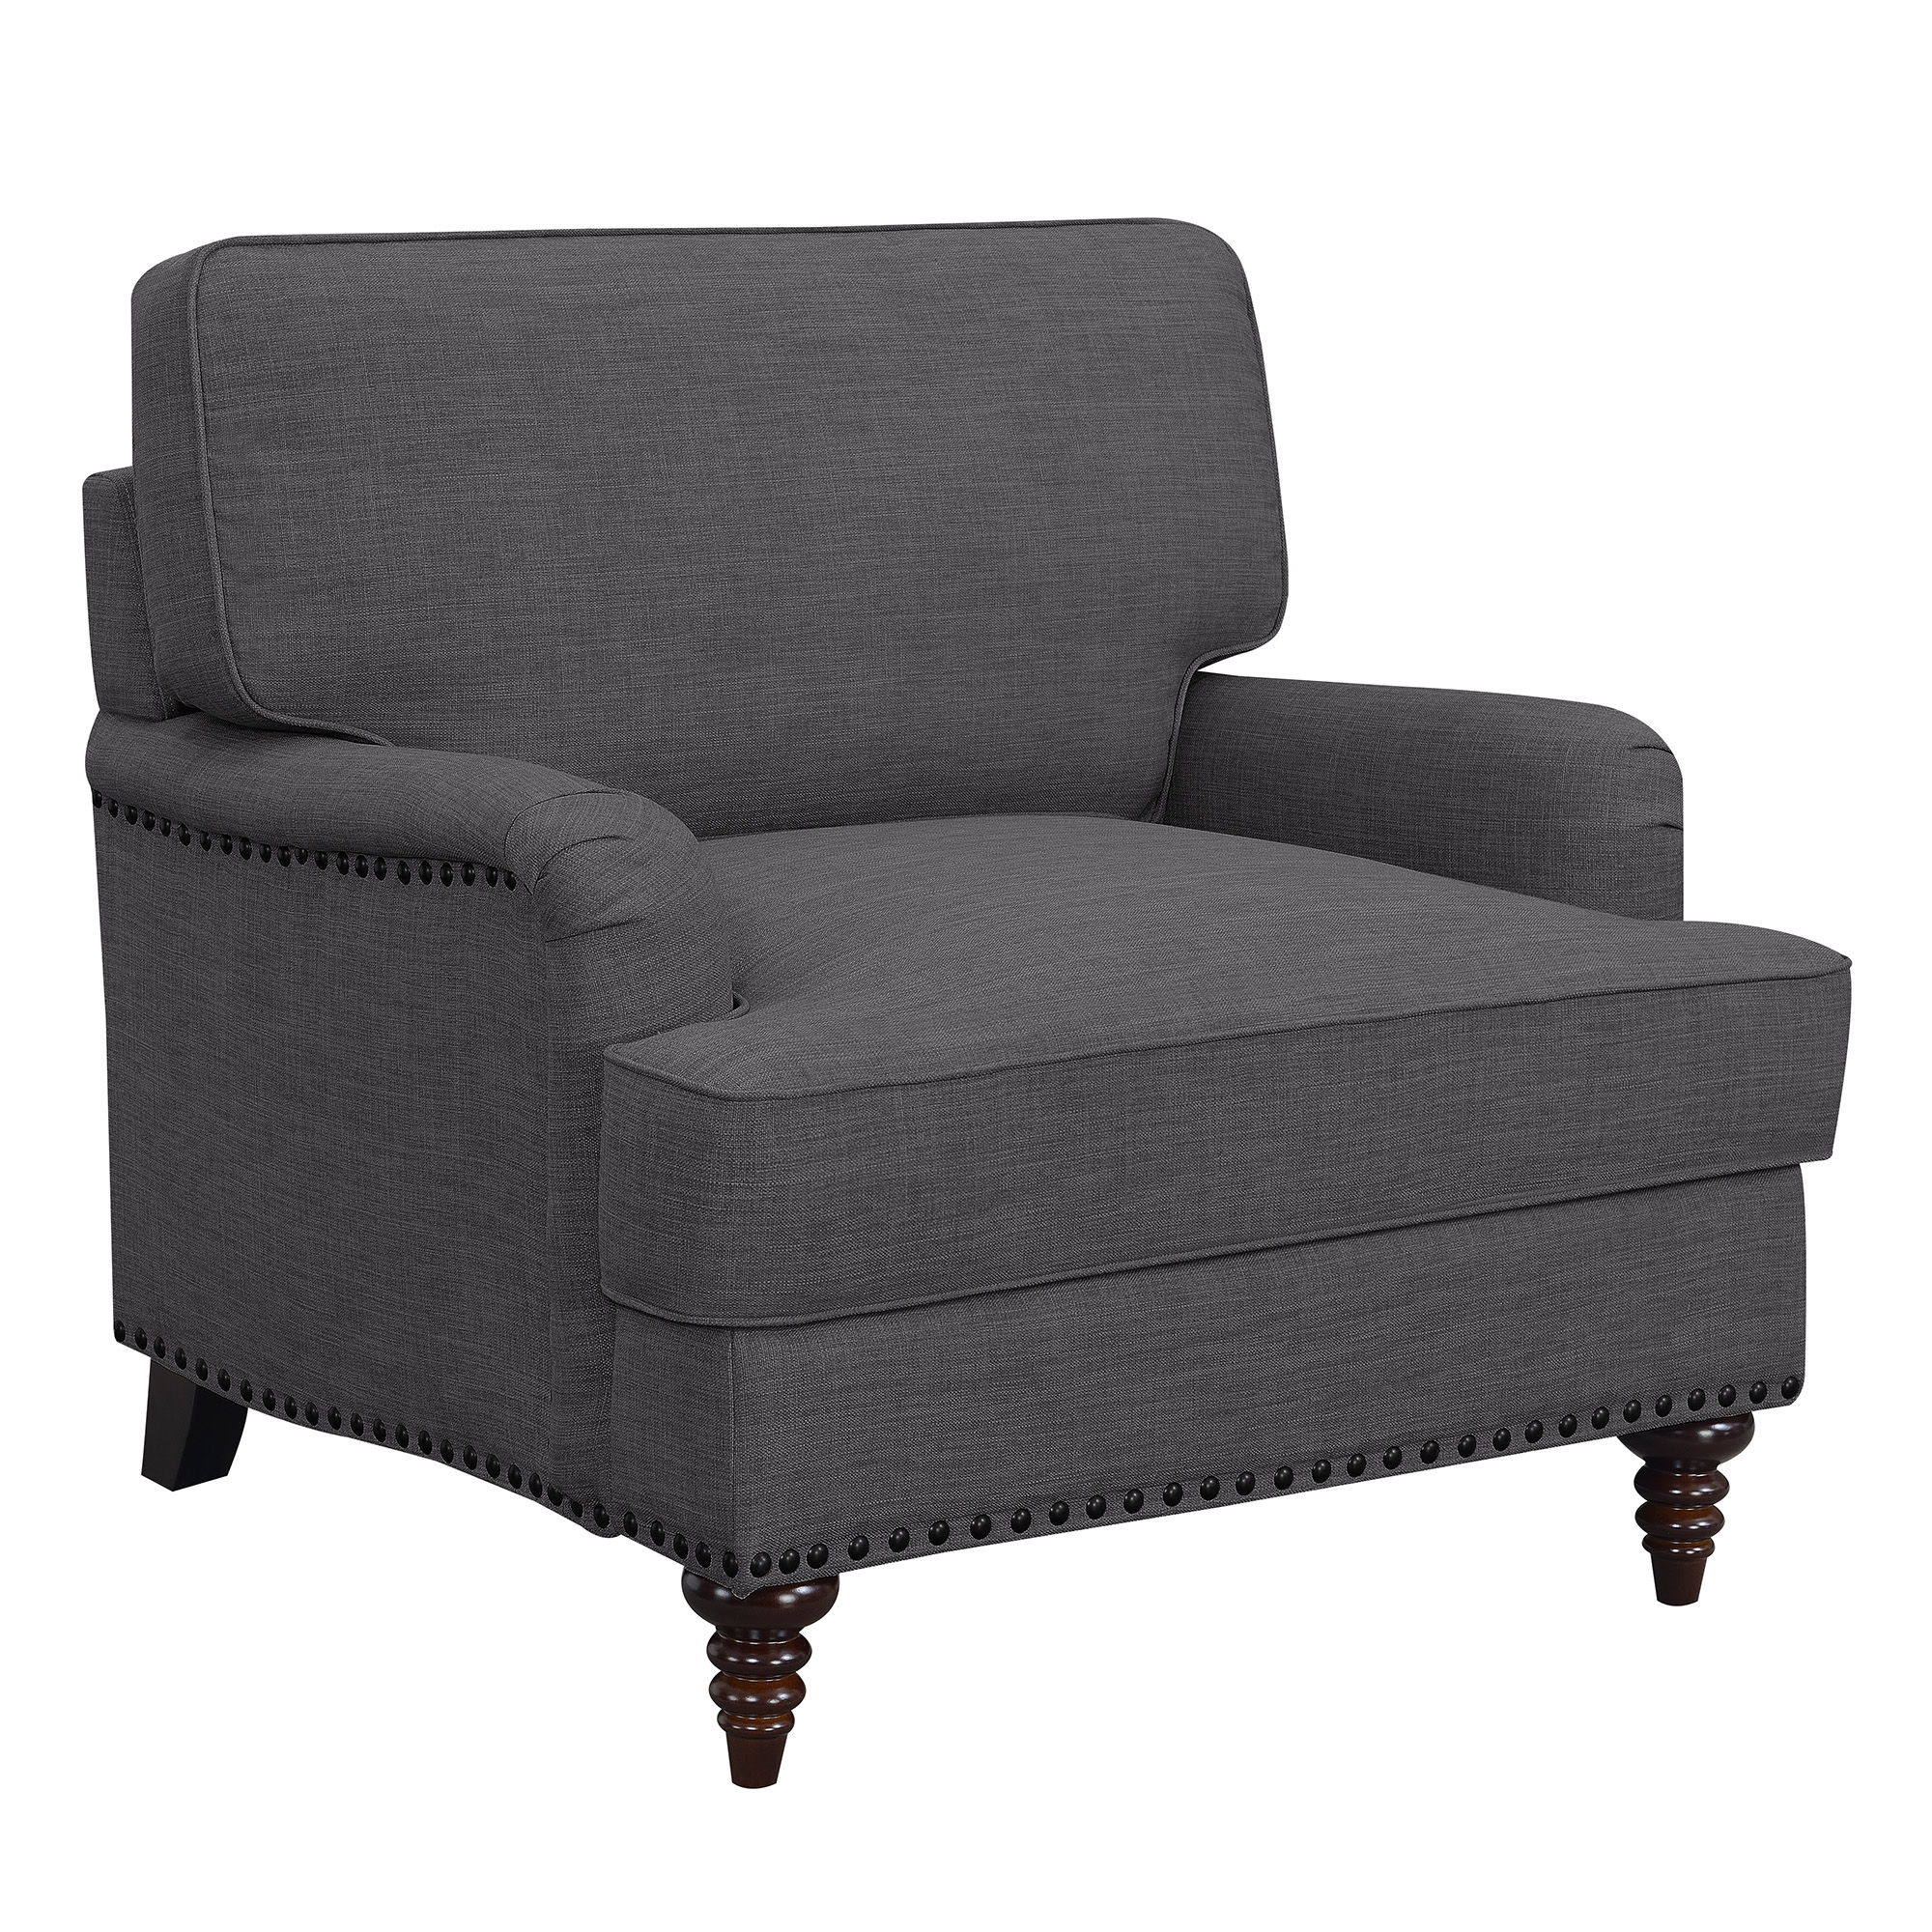 Abby Chair in Heirloom Charcoal